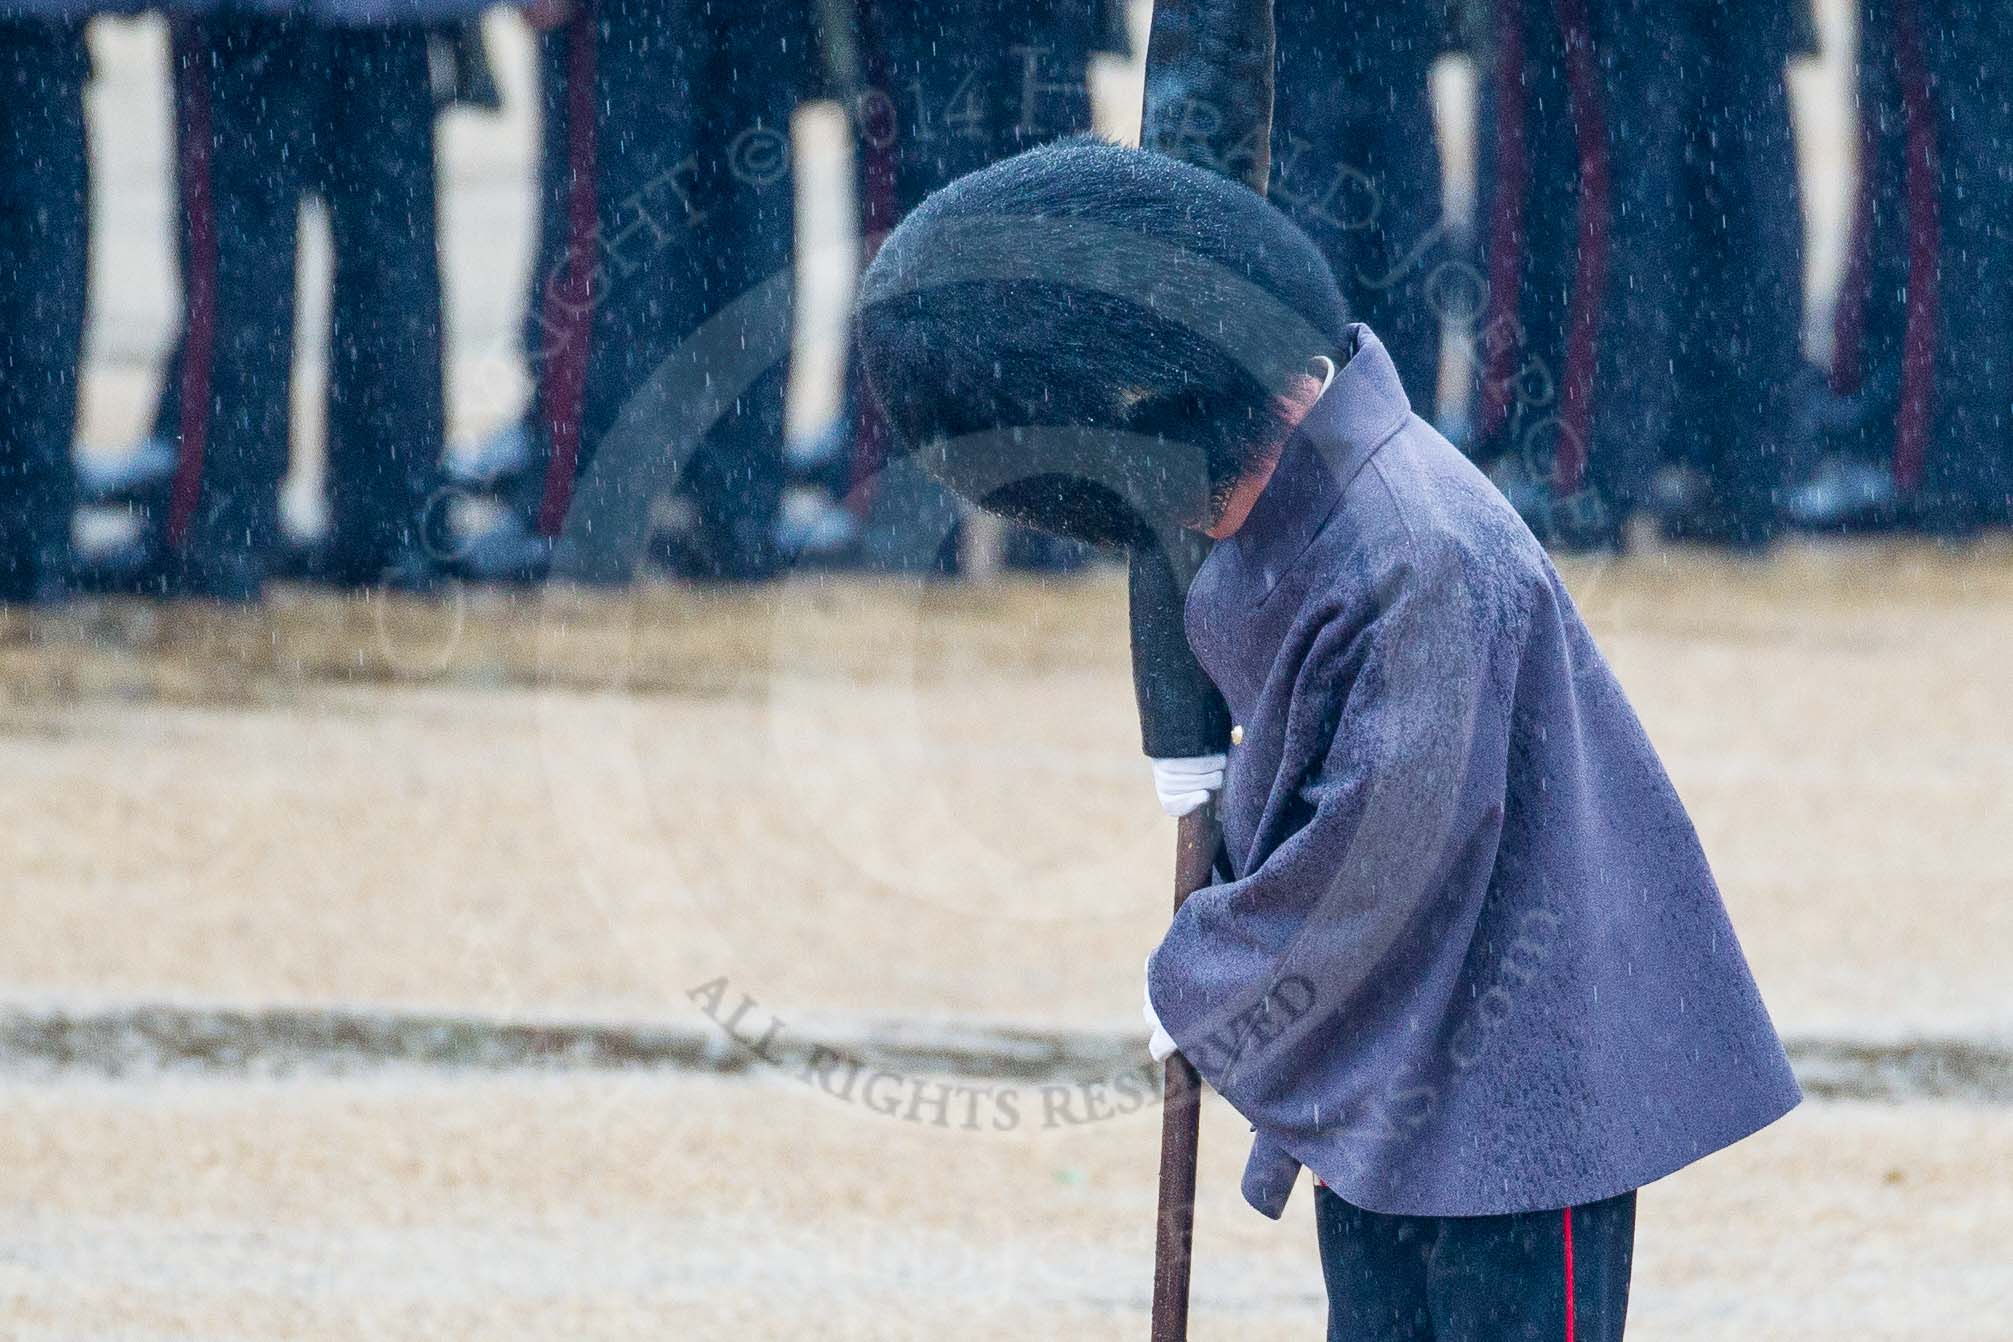 The Colonel's Review 2014.
Horse Guards Parade, Westminster,
London,

United Kingdom,
on 07 June 2014 at 10:20, image #100